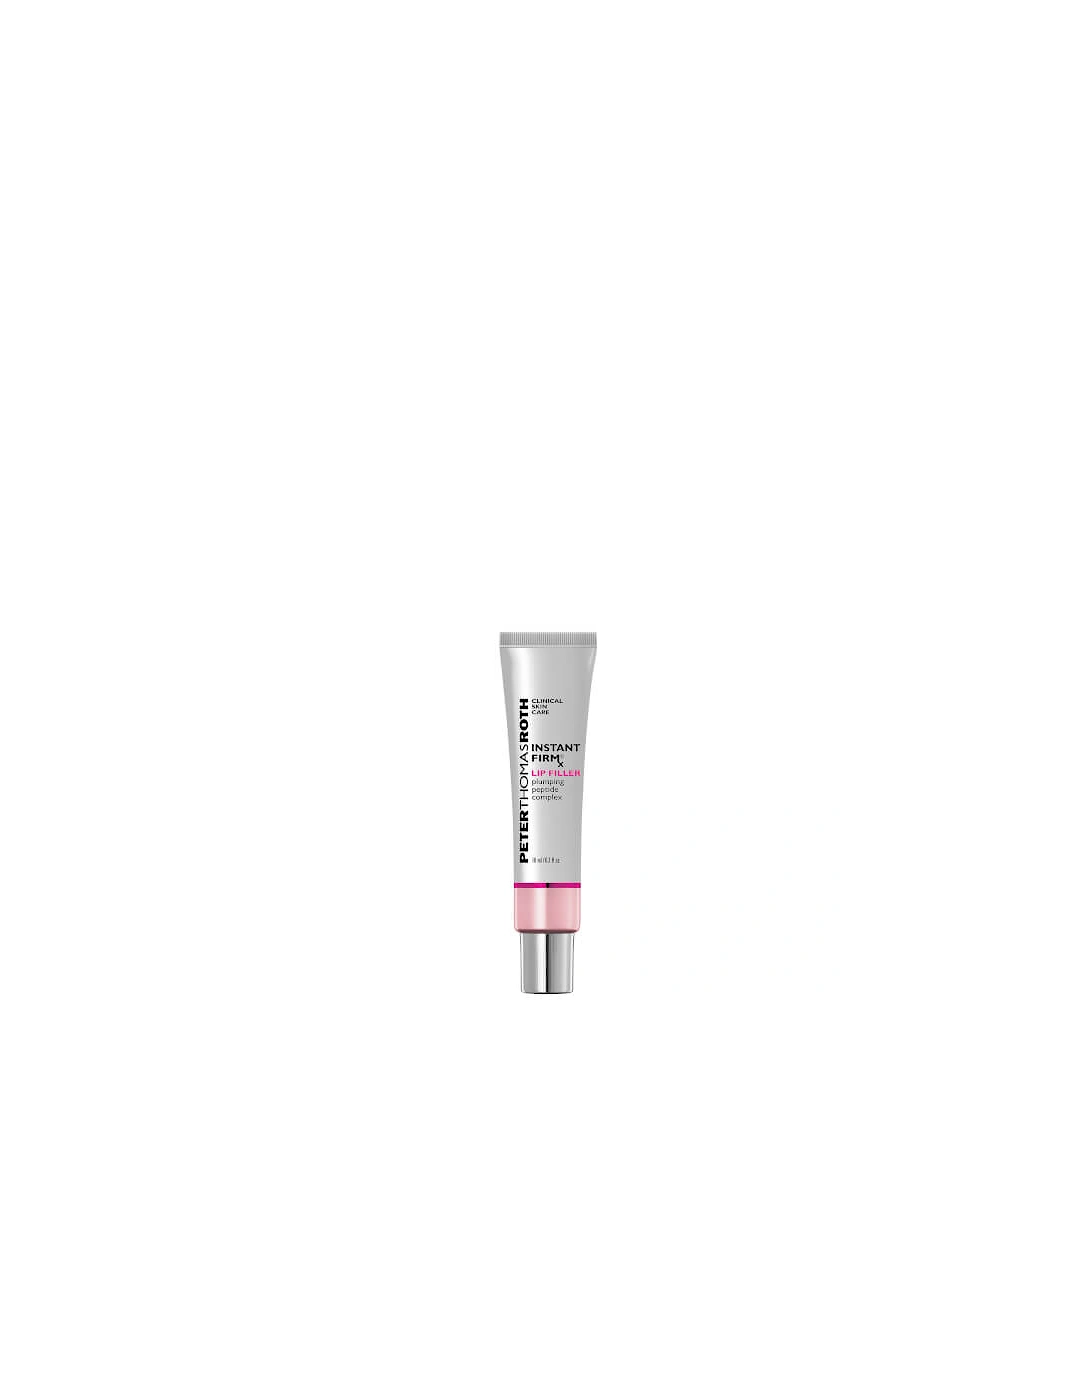 Instant FIRMx Lip Treatment 30g, 2 of 1